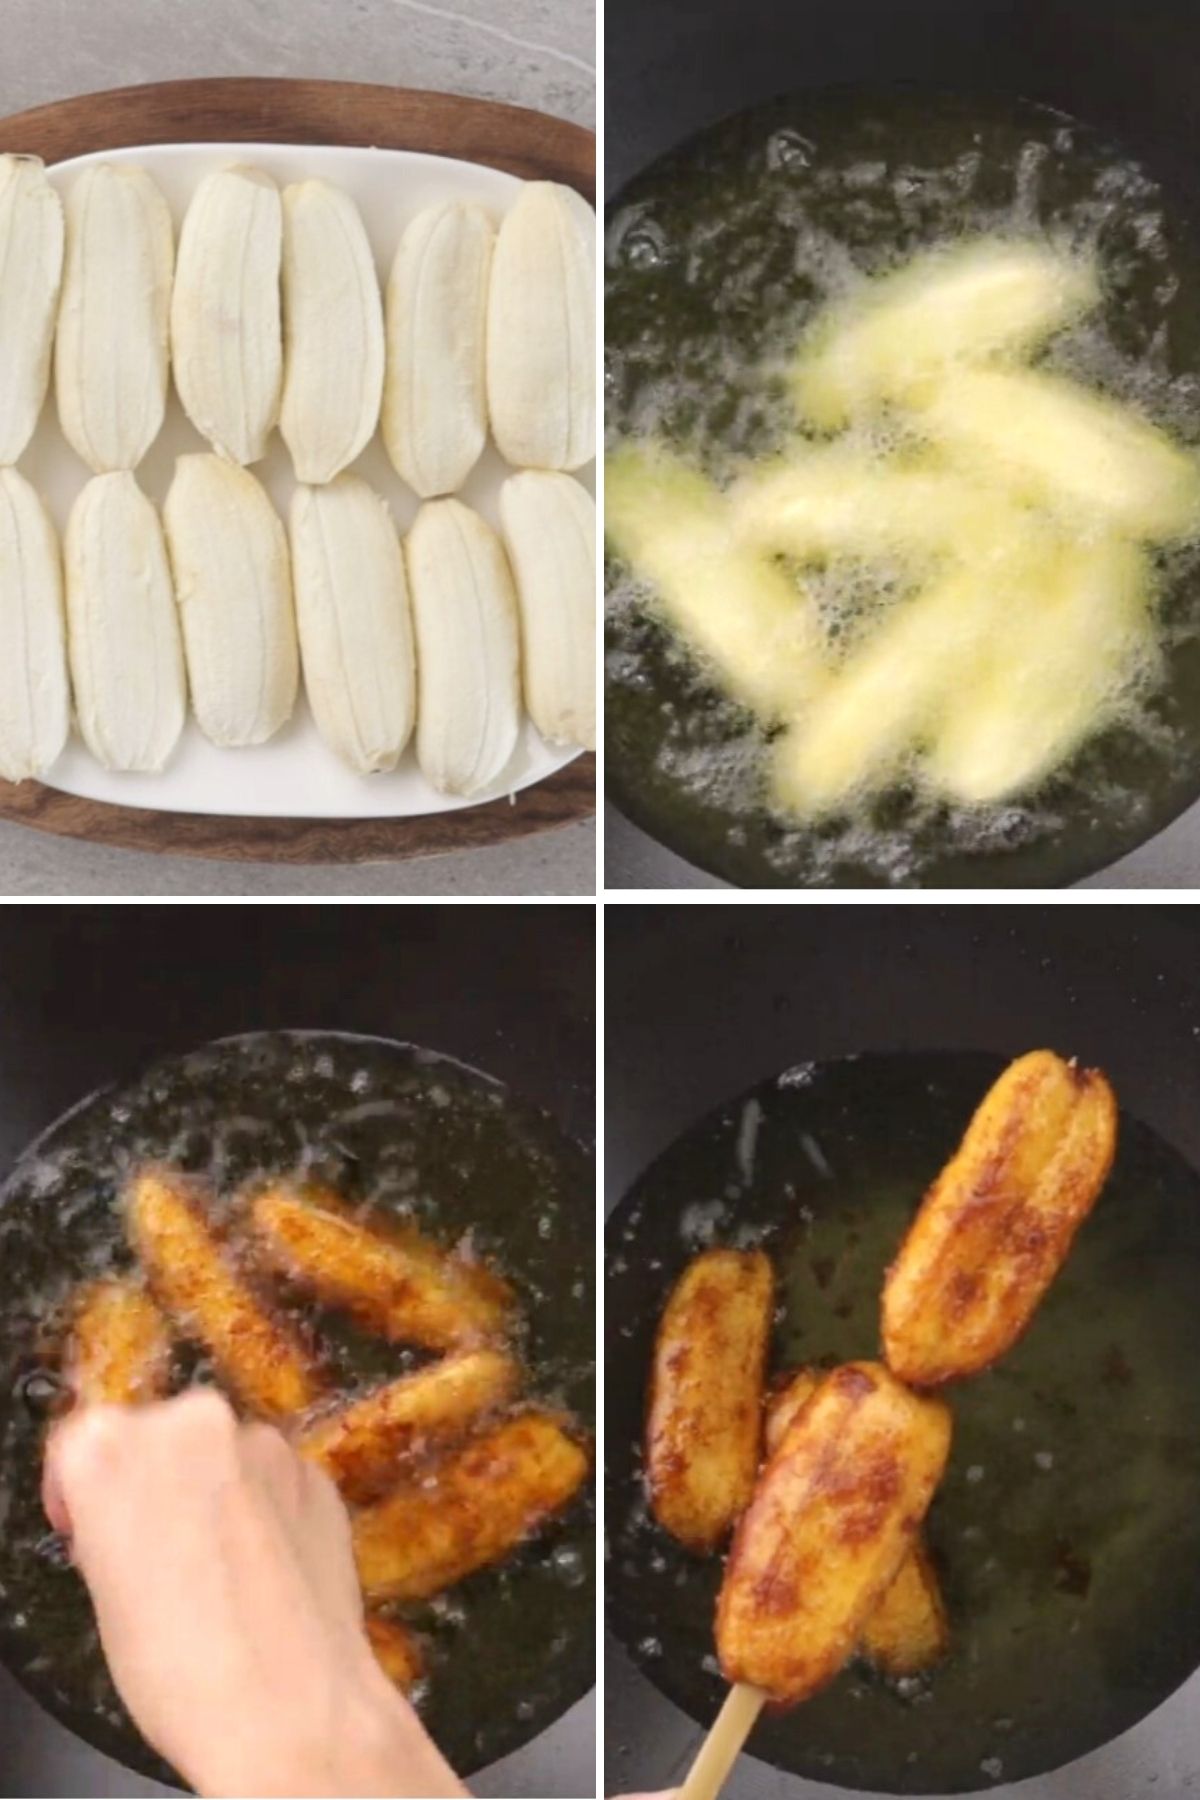 Steps on how to make banana cue.